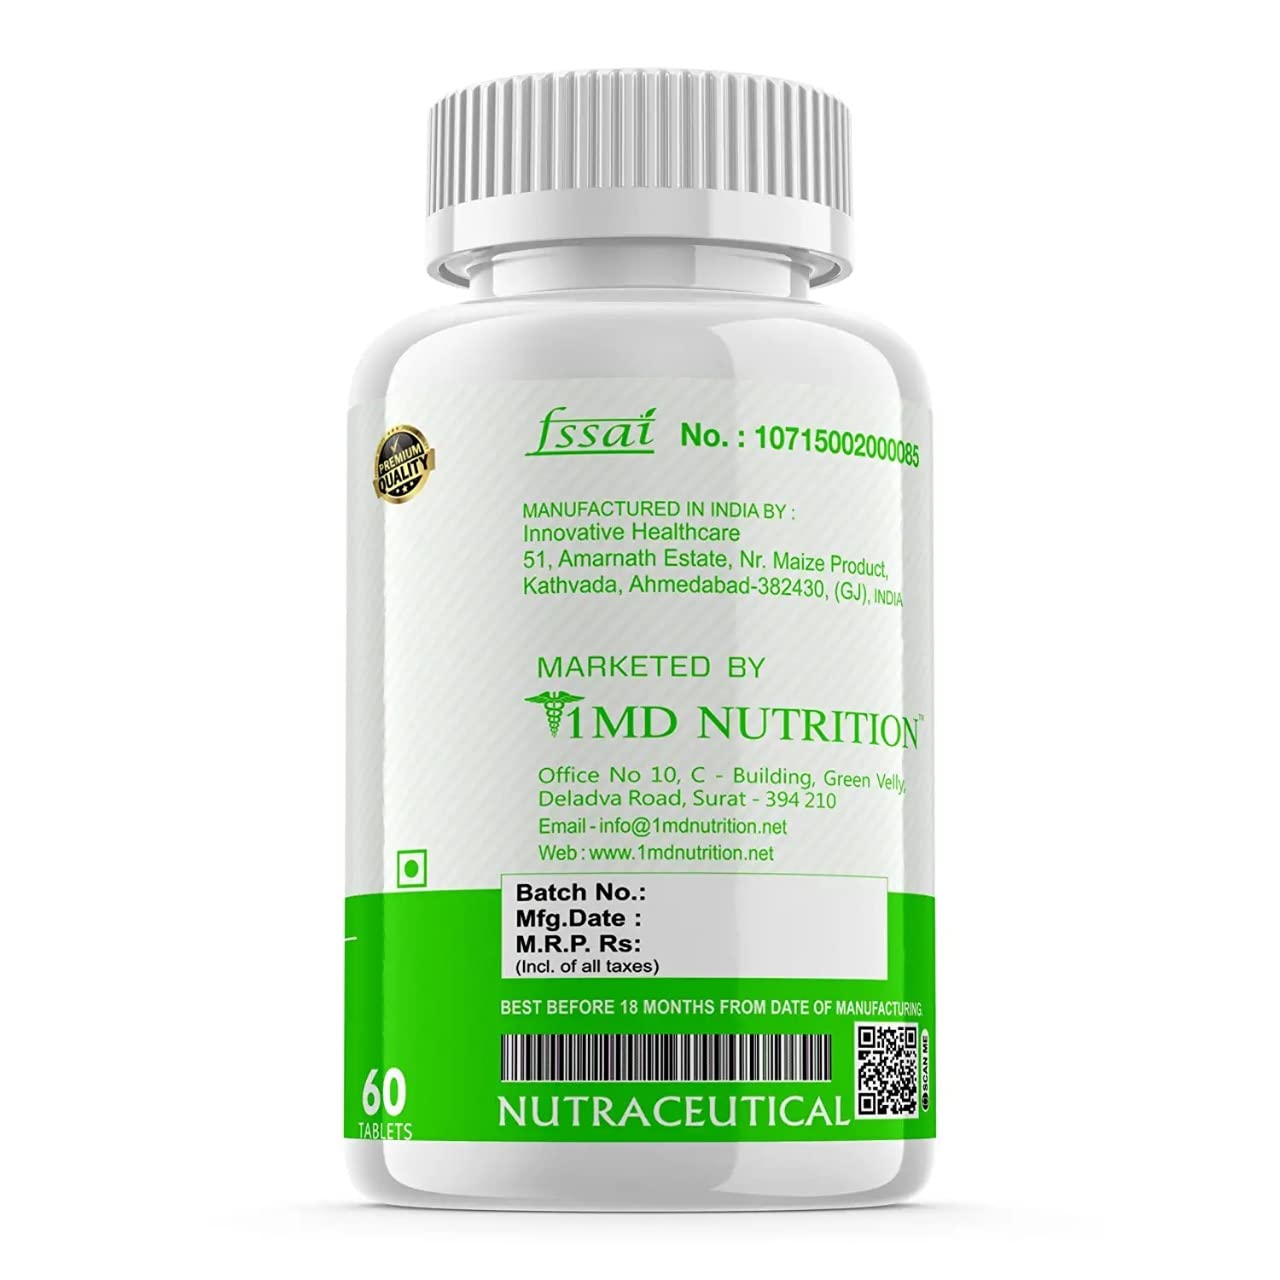 1MD NUTRITION ZMA+ - Support Lean Muscle, Strength & Better Sleep - 60 Tablets